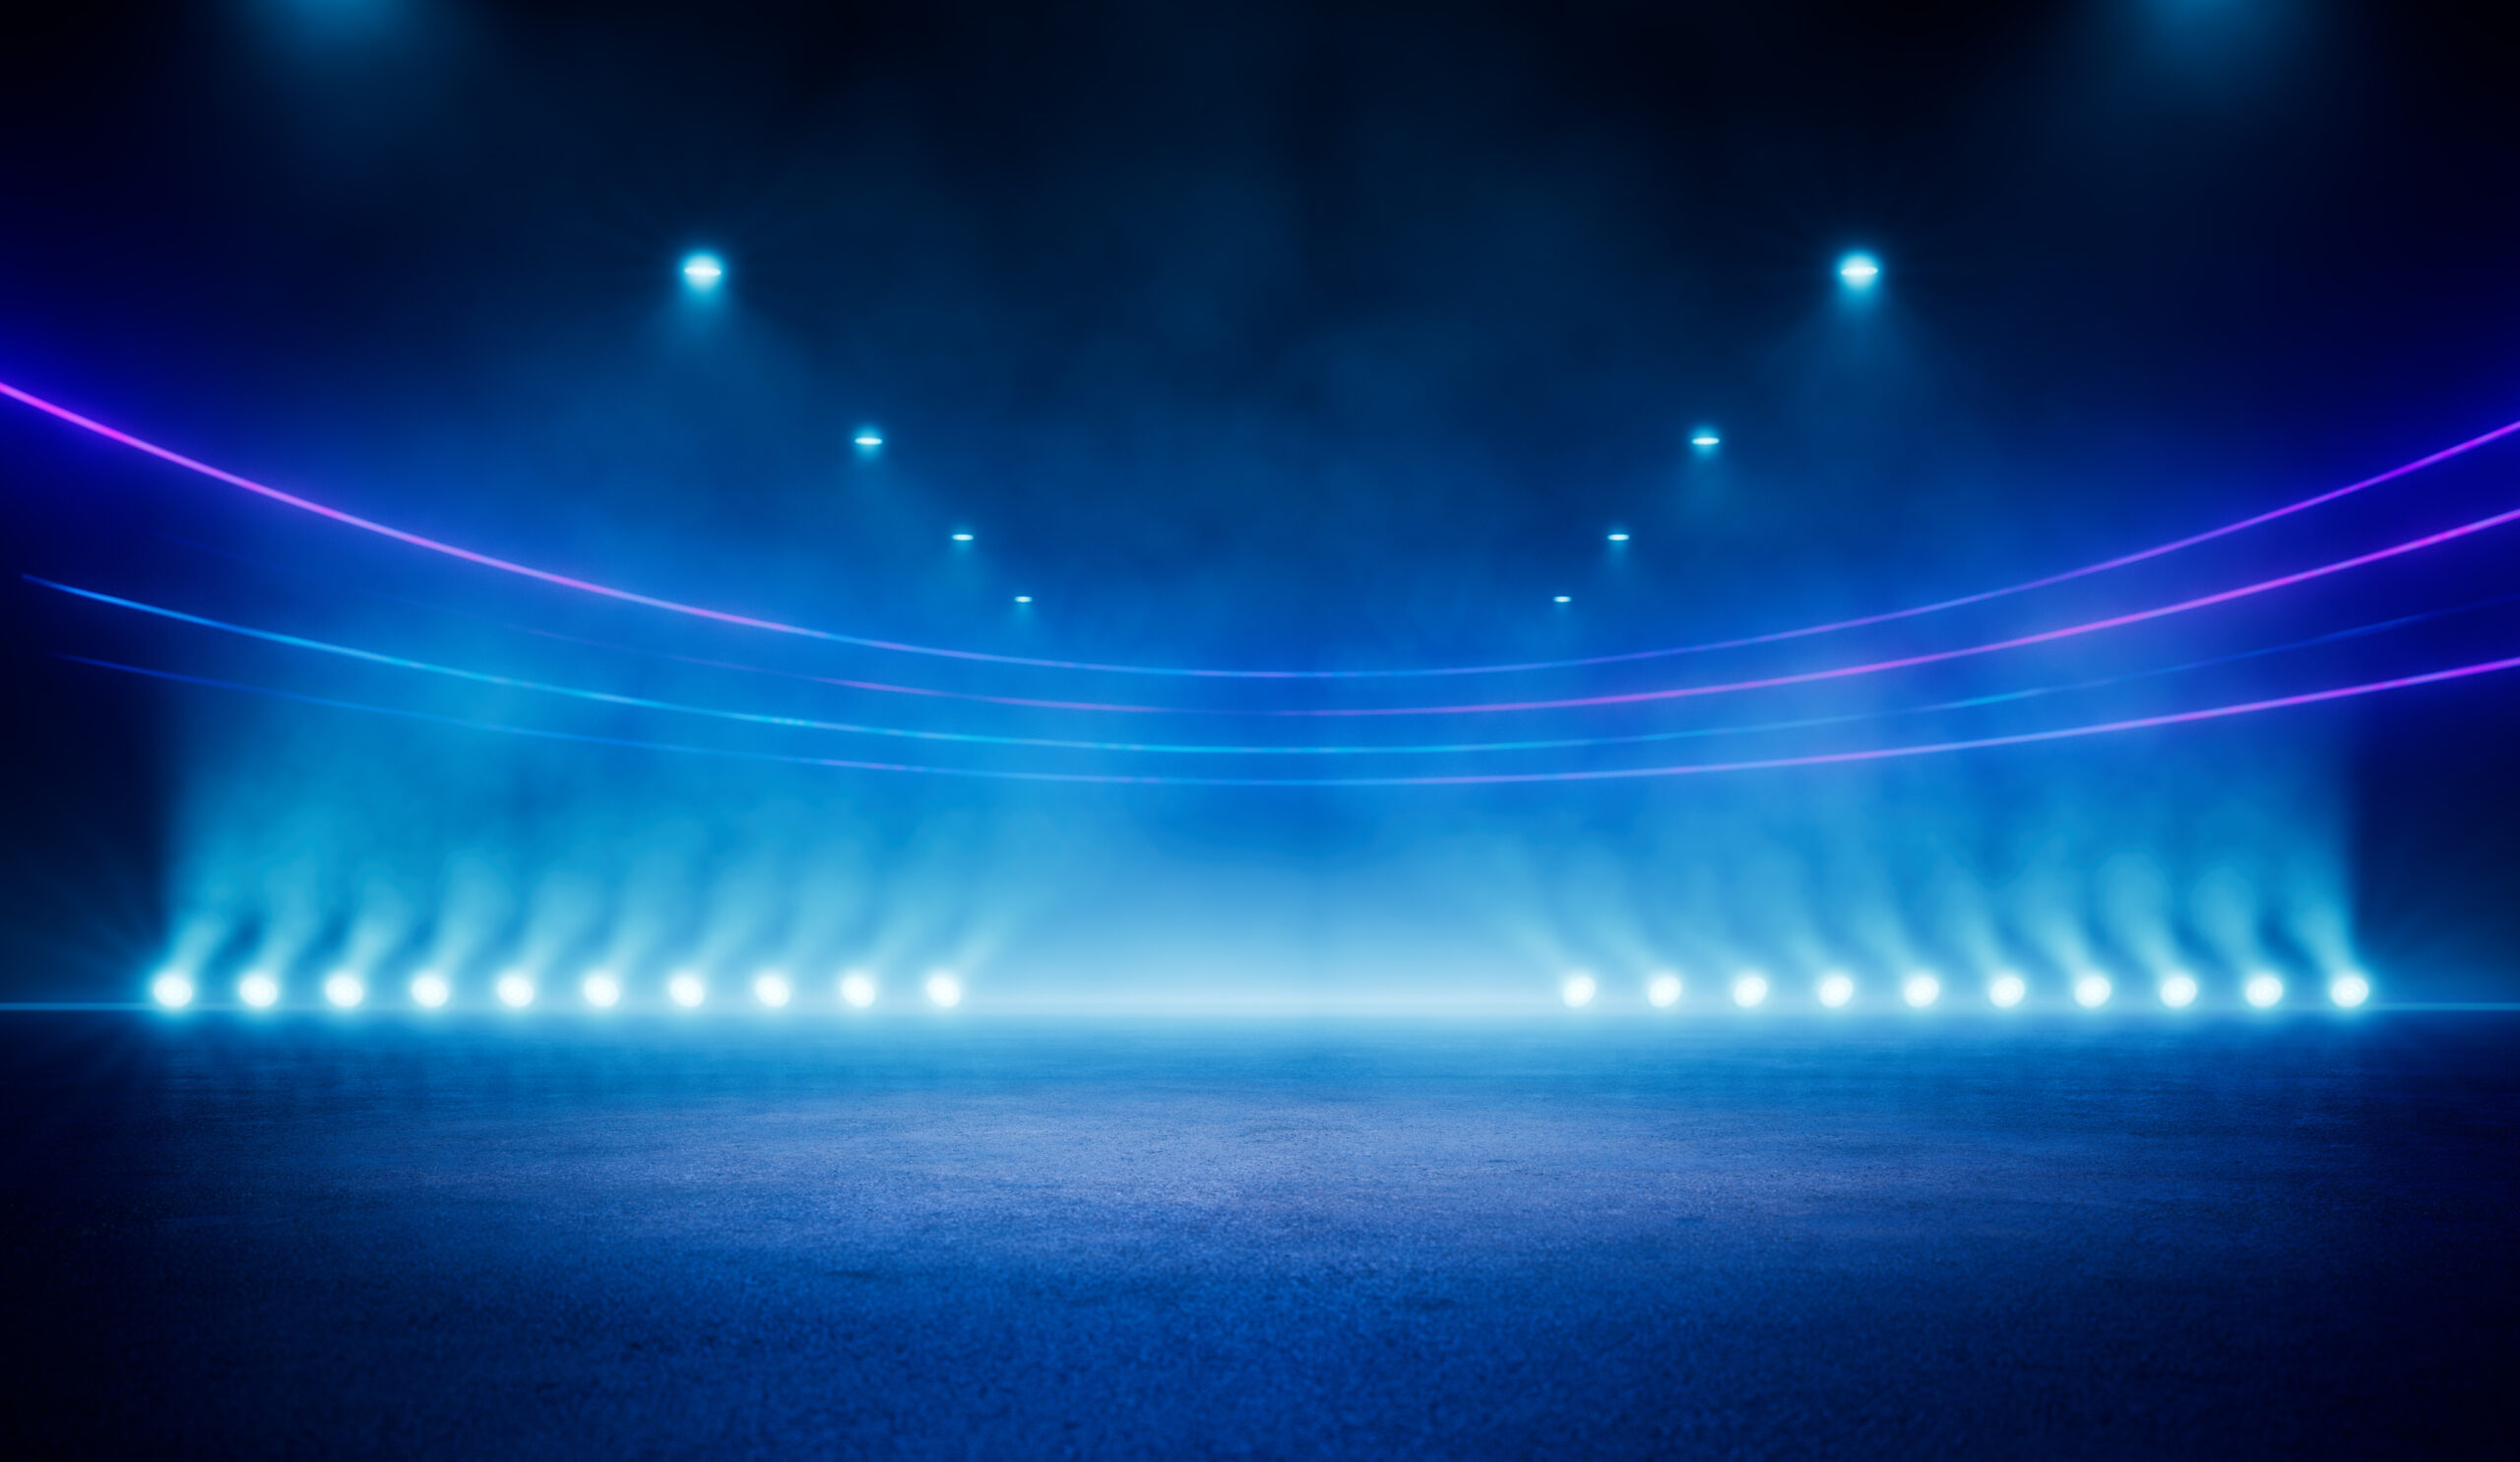 Abstract blue neon stadium background illuminated with lamps on ground. Science, product and sports technology background.